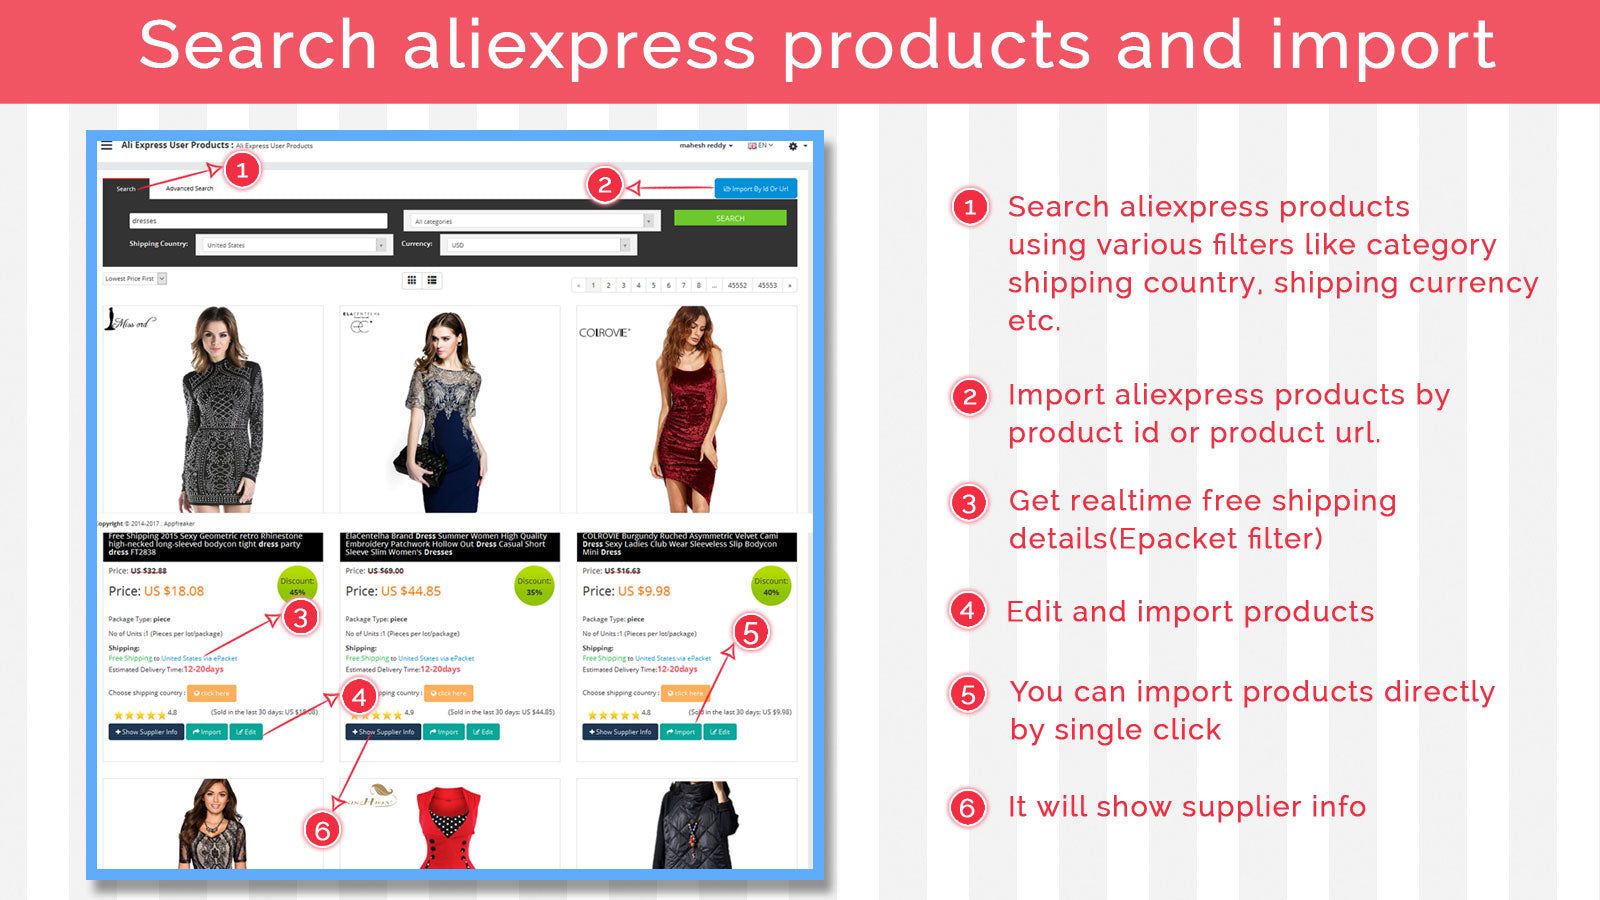 Search aliexpress product and import